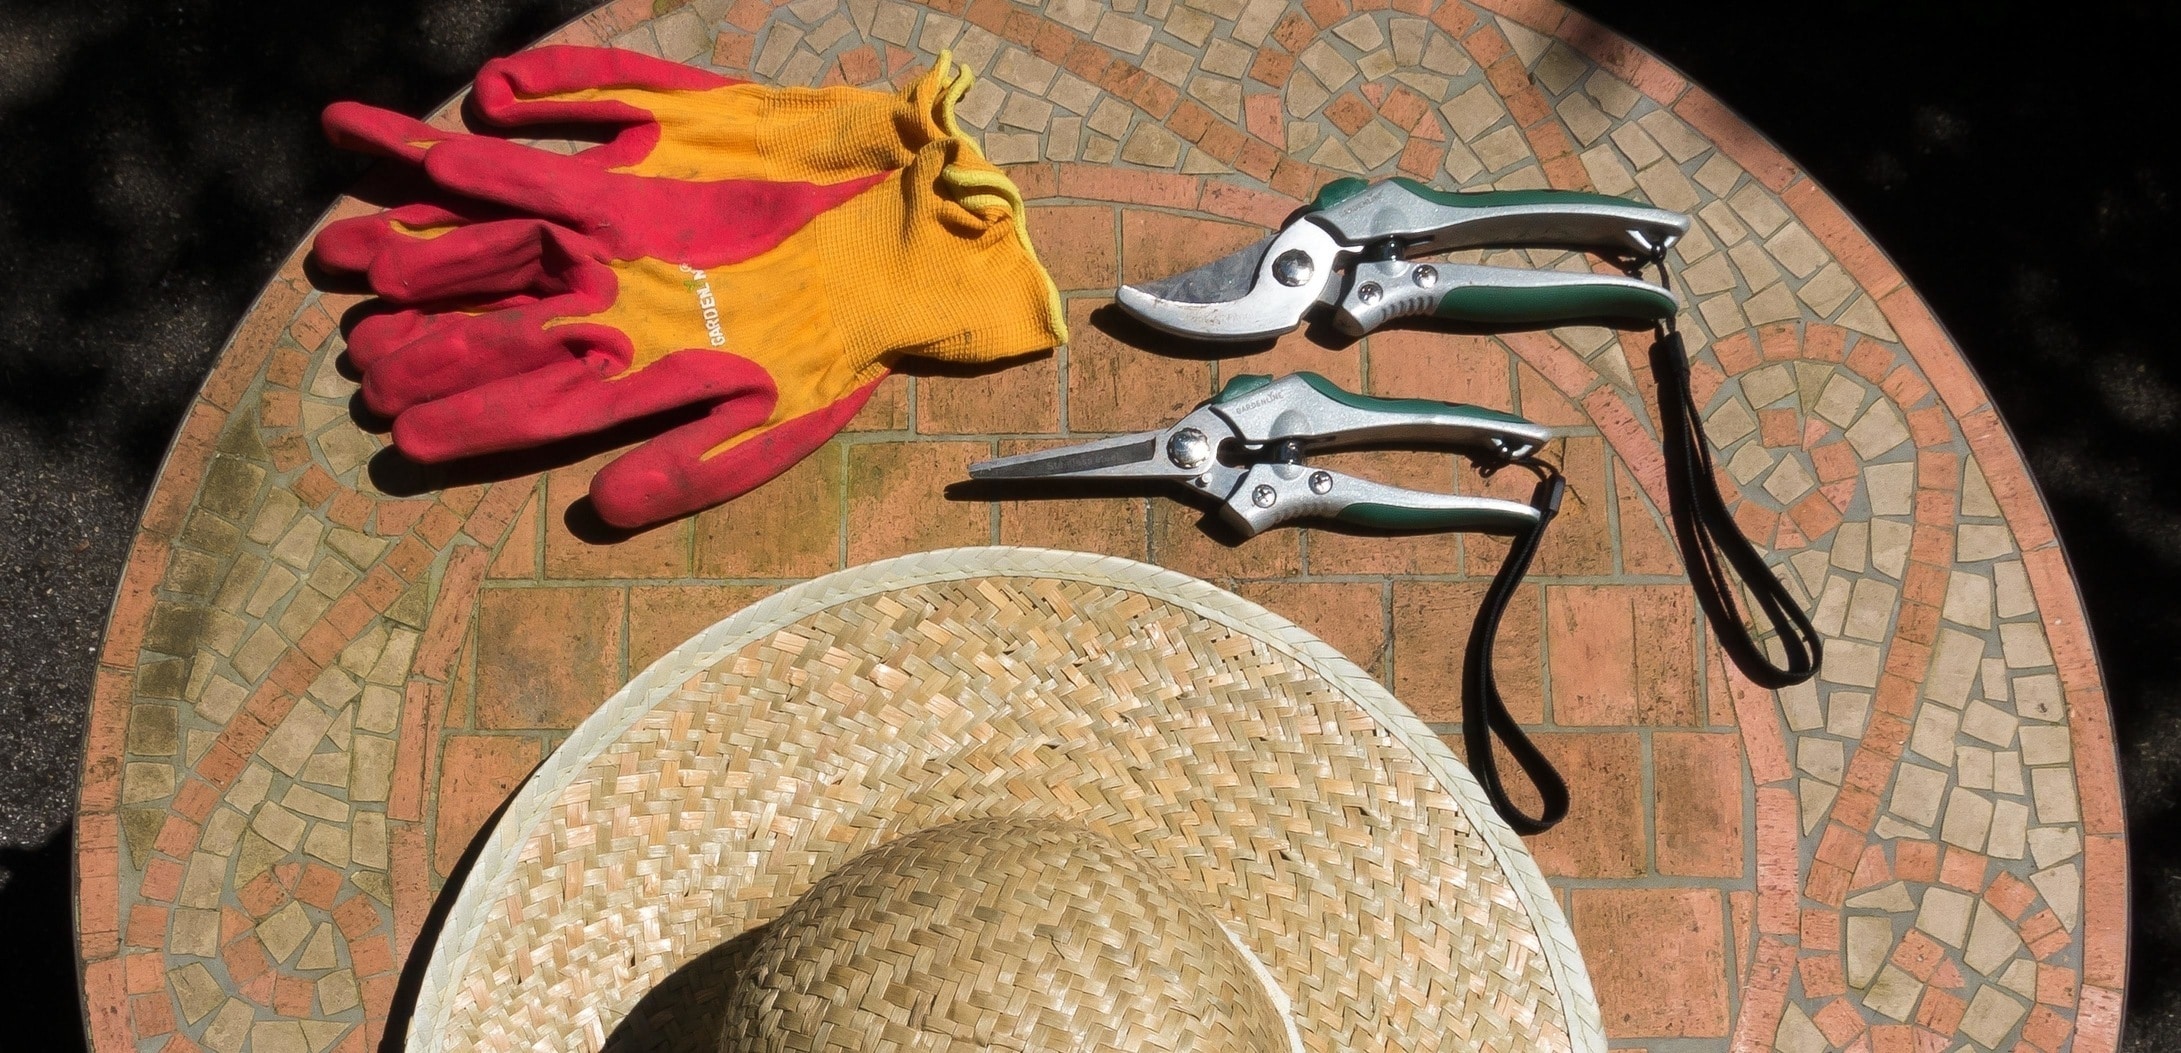 Bush and garden trimming tools